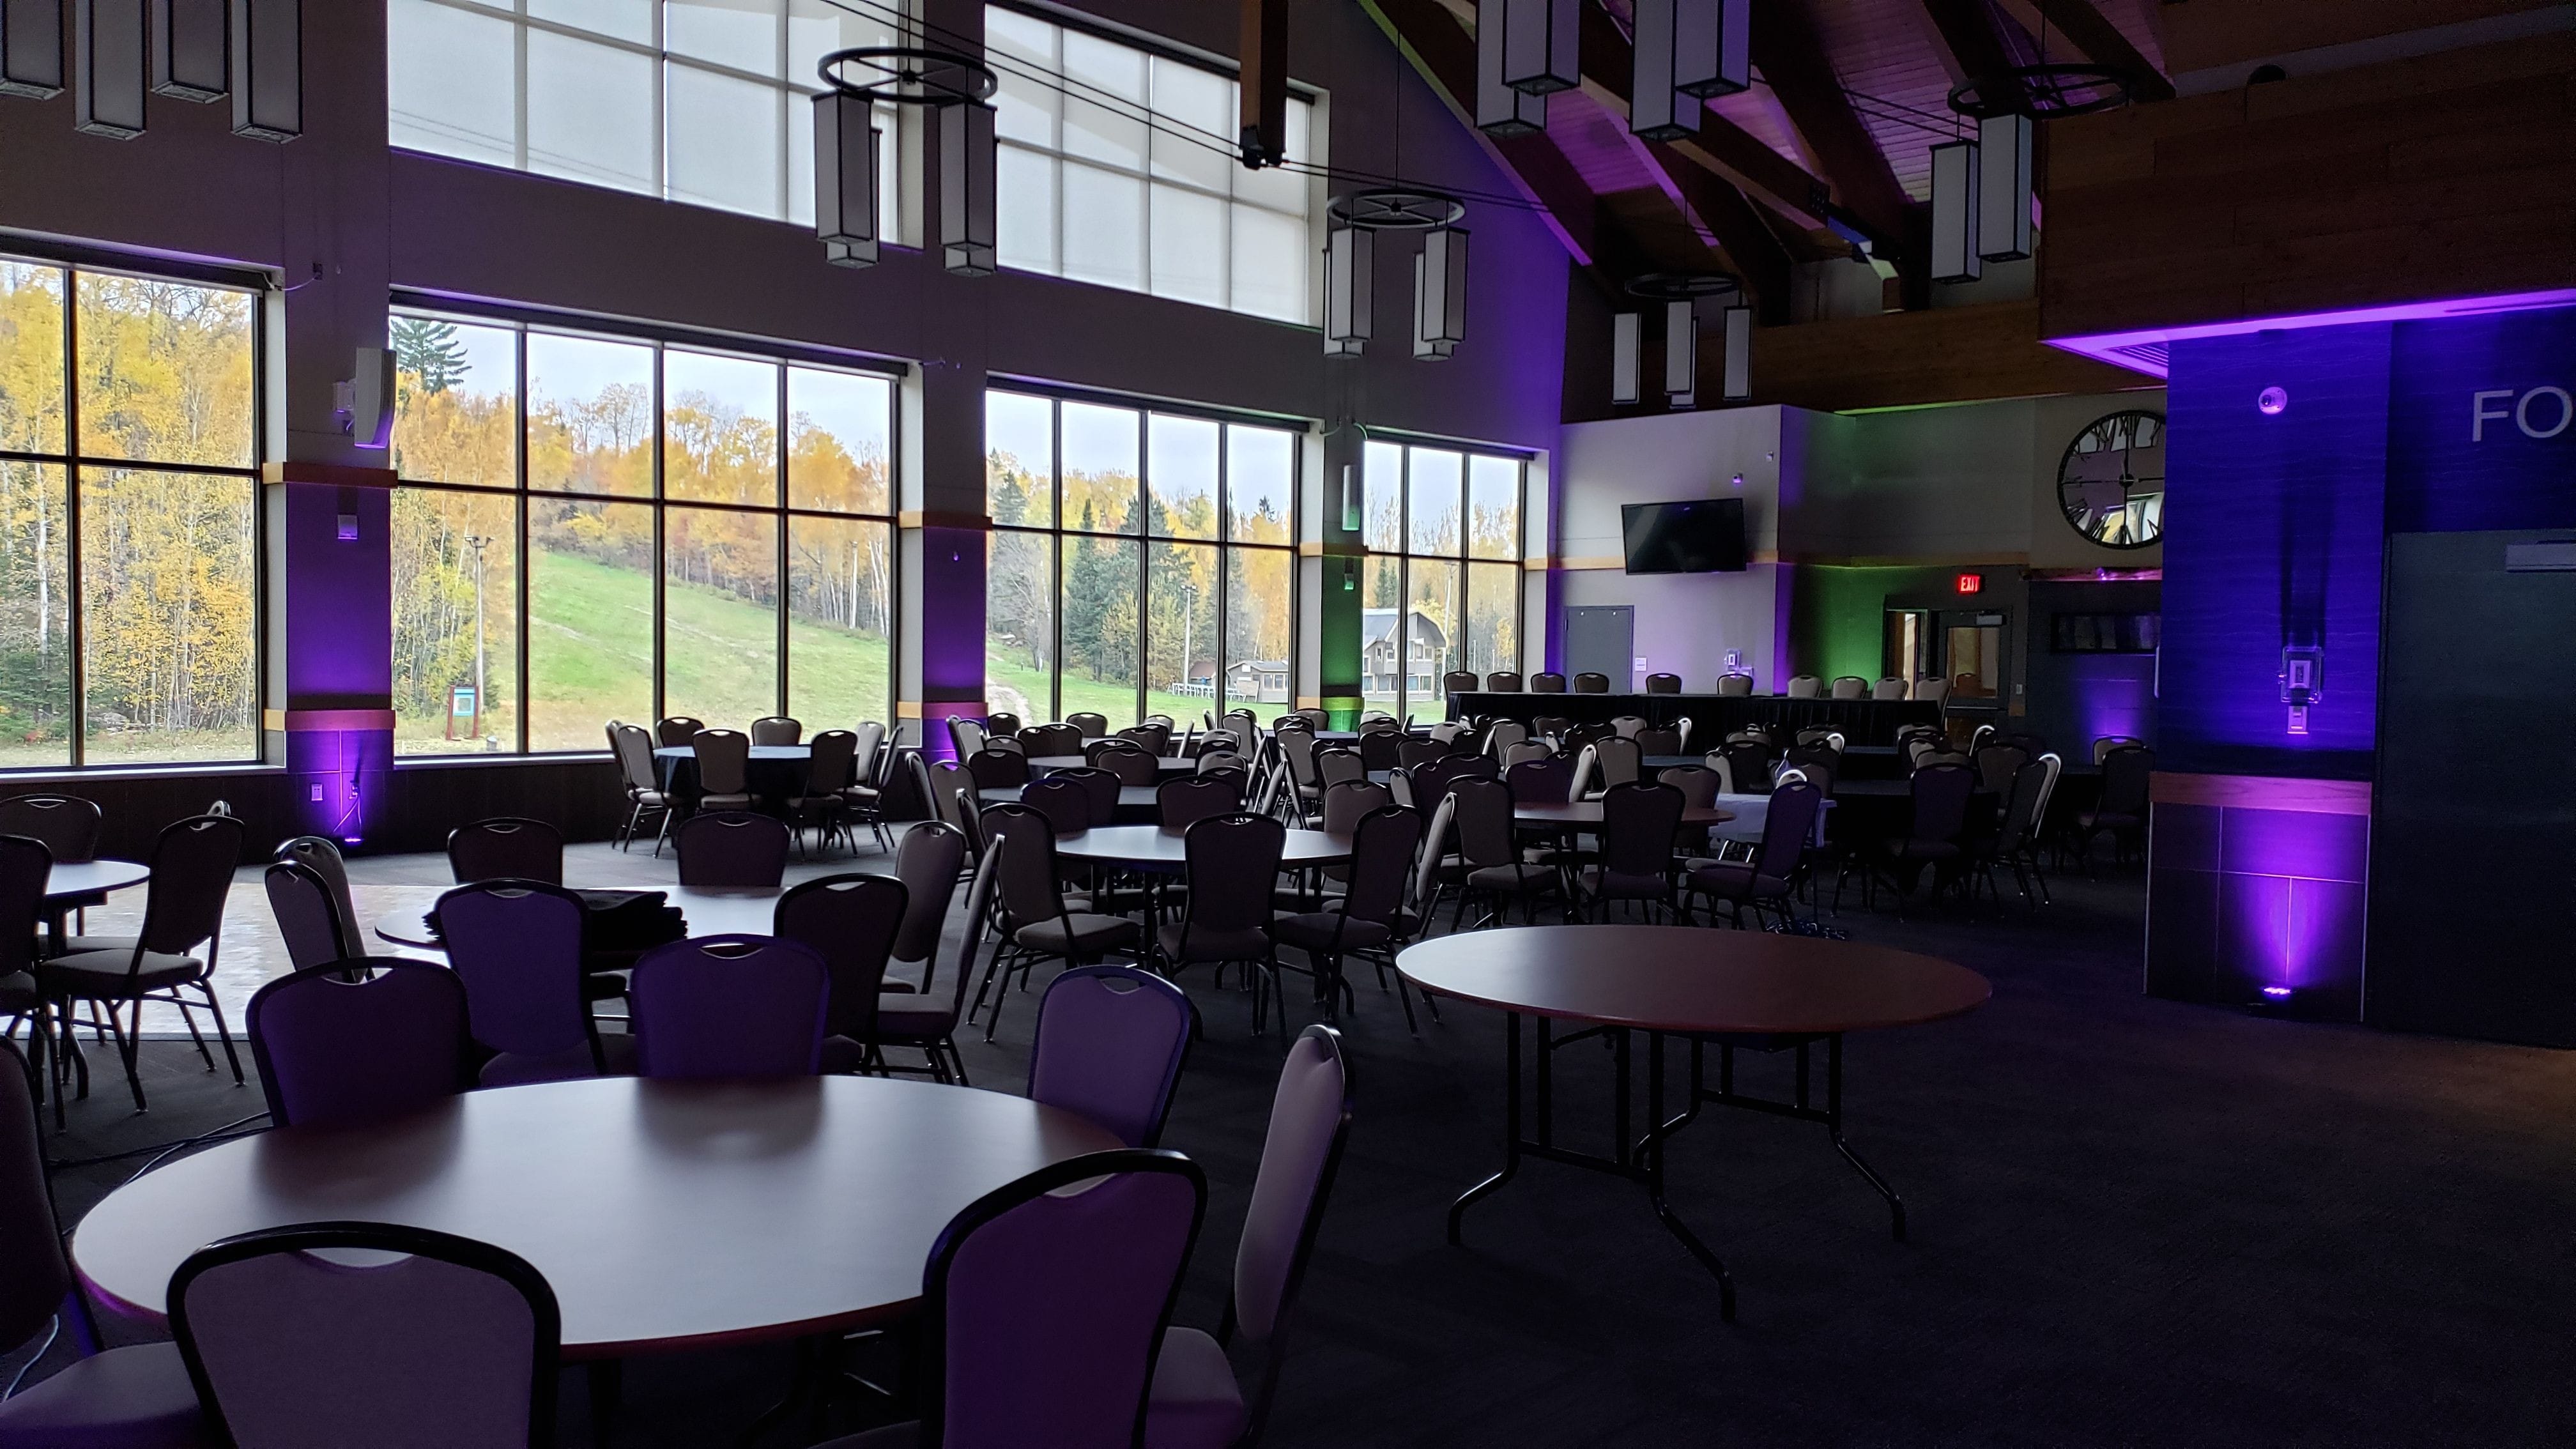 Up lighting in green and purple by Duluth Event Lighting at Giants Ridge